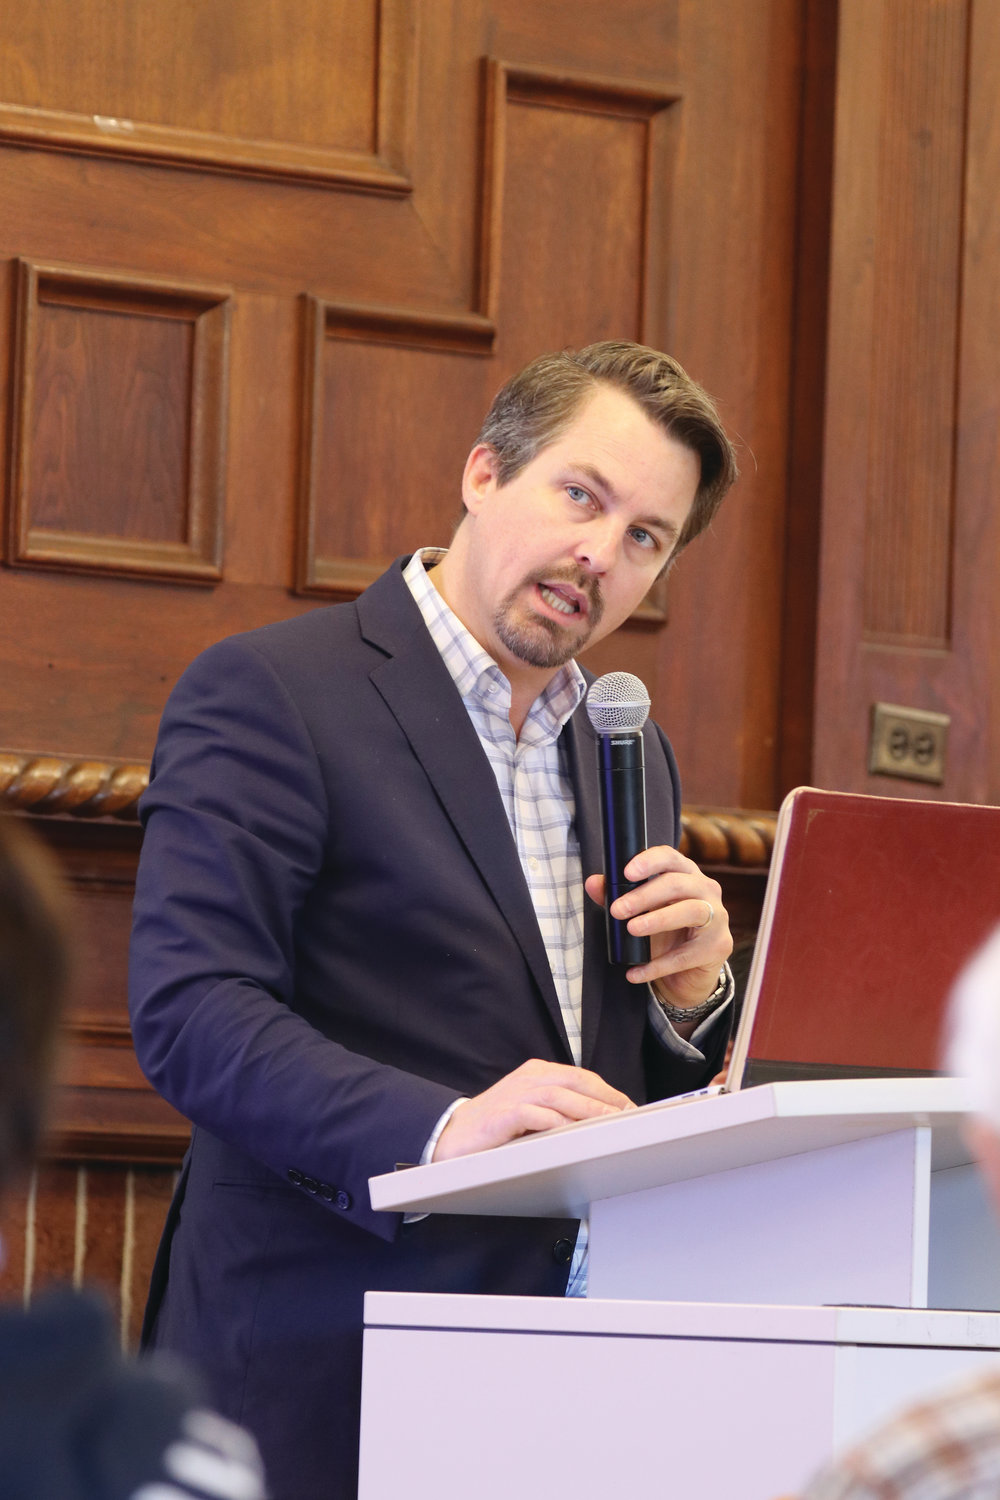 Dr. Chad Pecknold, associate professor of theology at Catholic University of America, offers his presentation during the first forum in the diocese’s Caring for Creation series, held on Oct. 19 at Providence College.